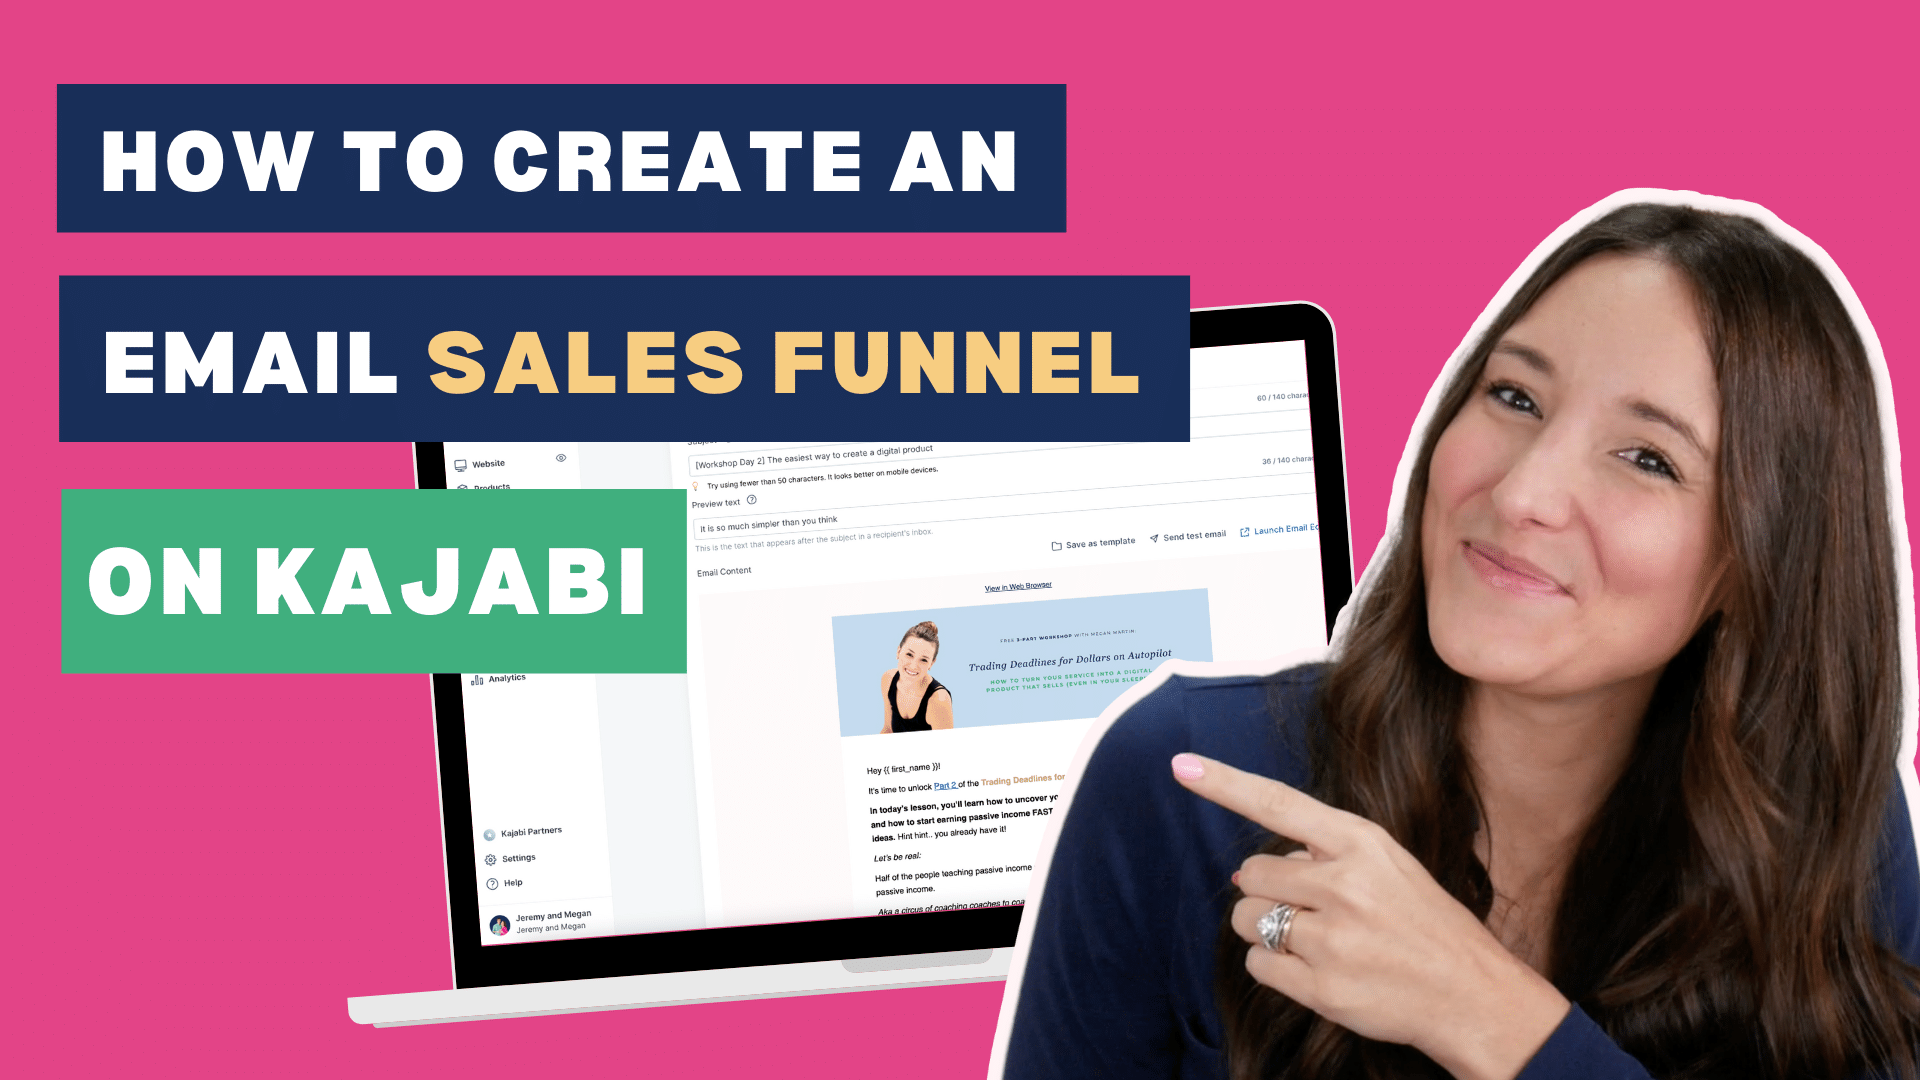 How to create your first email sales funnel on Kajabi, a walkthrough from digital marketing expert Megan Martin, for small business owners